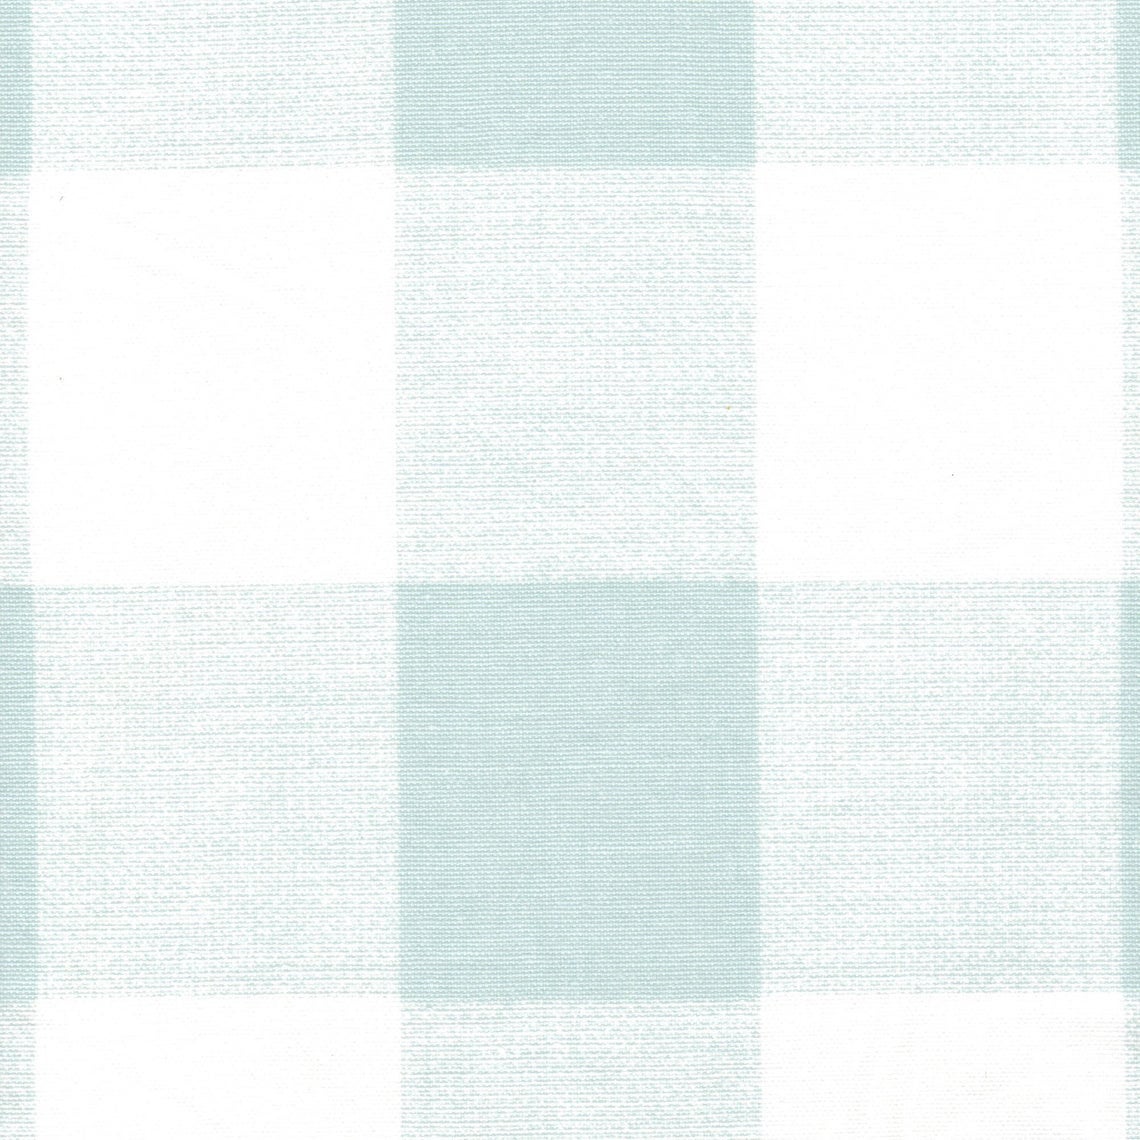 duvet cover in anderson snowy pale blue-green buffalo check plaid